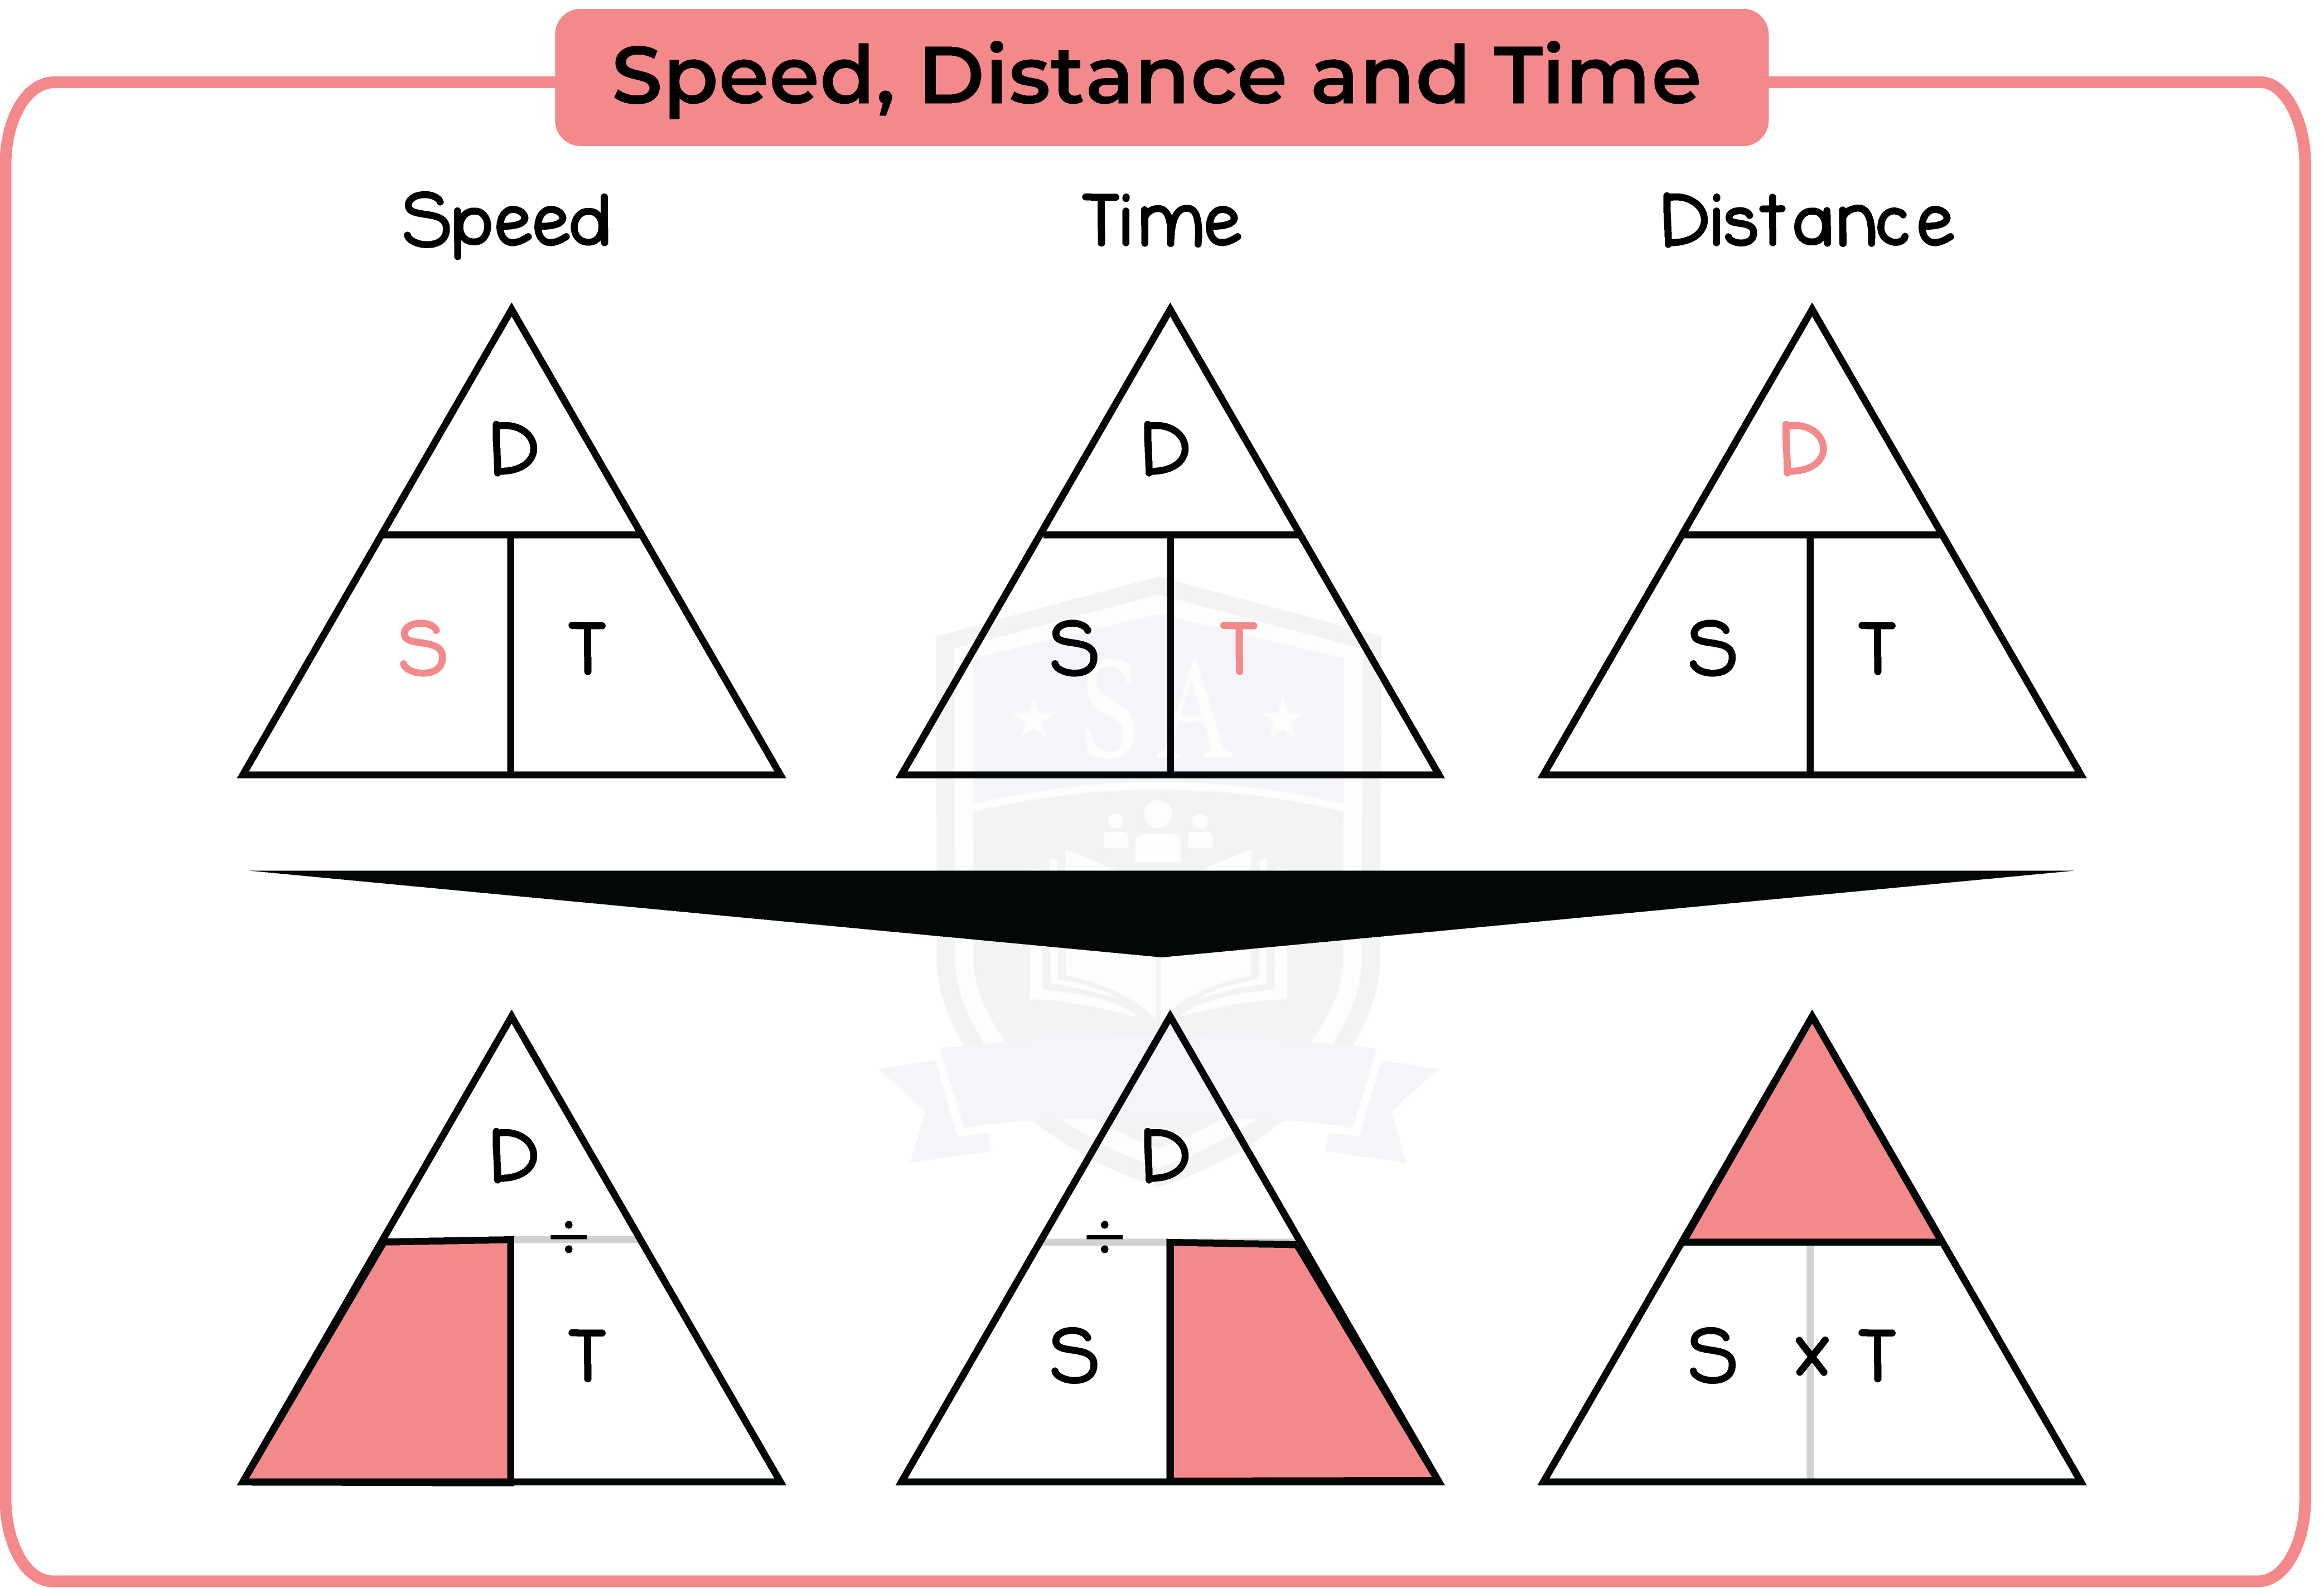 edexcel_igcse_mathematics a_topic 28_measures_001_Speed, Distance and Time